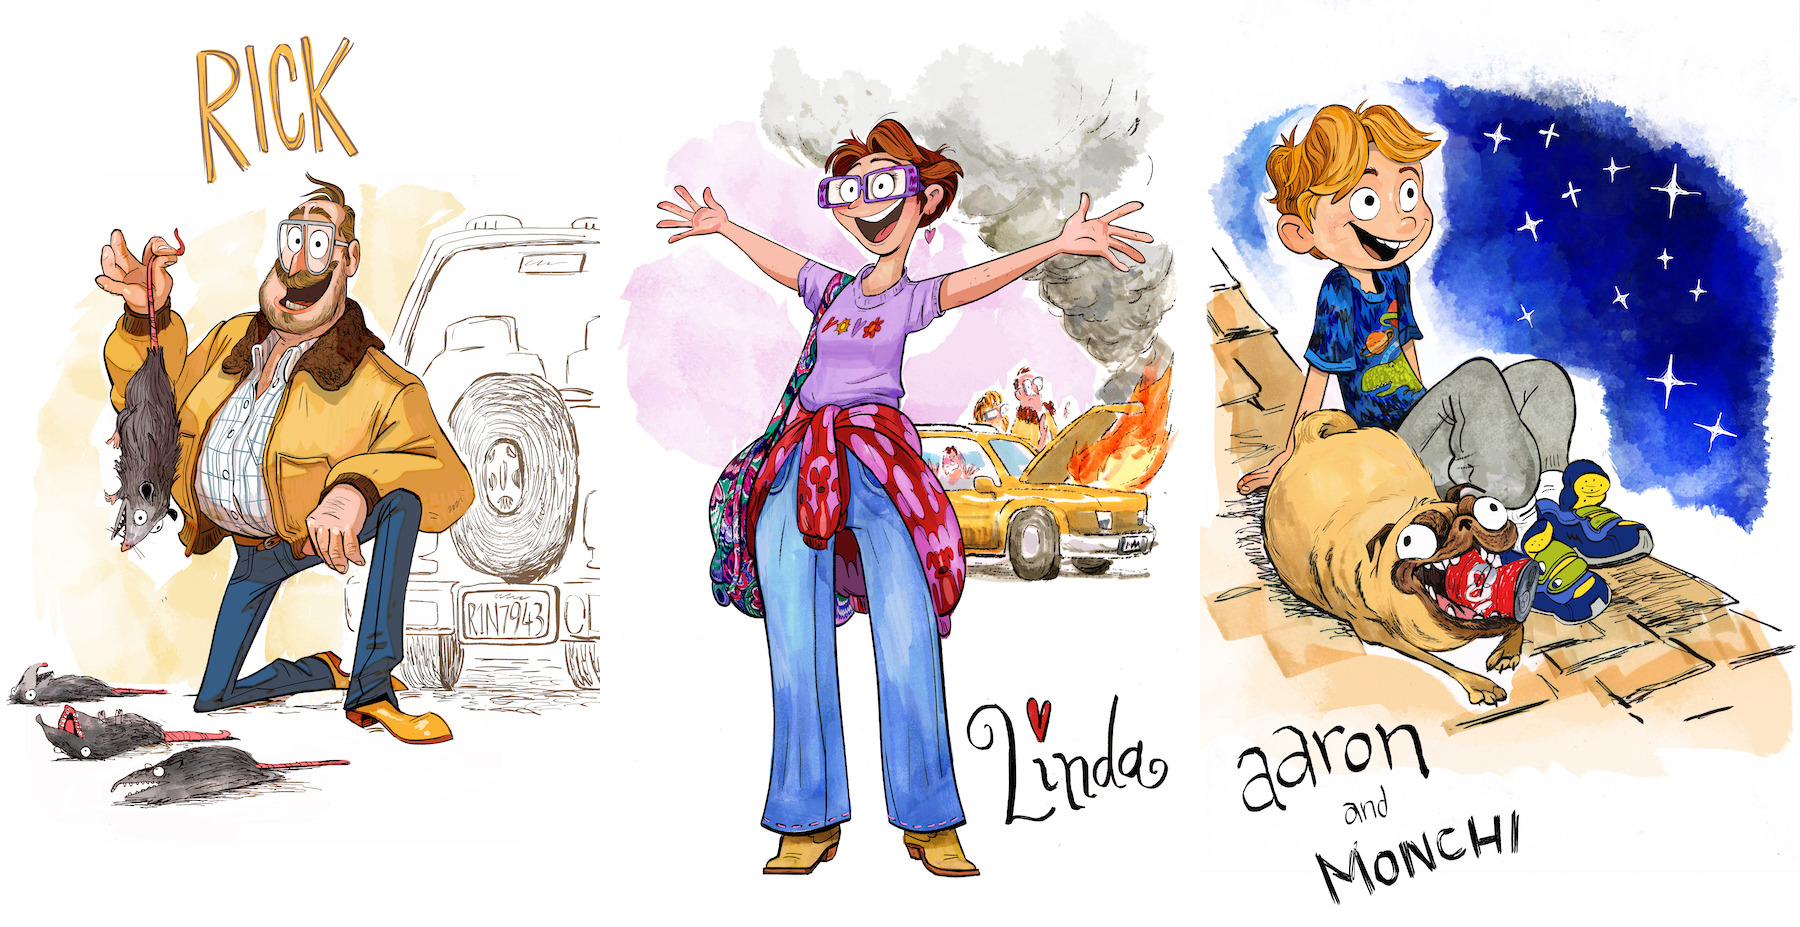 colorful concept art showing the dad with dead rodents, the mom smiling despite the car being on fire, and Aaron and Monchi the dog on the roof